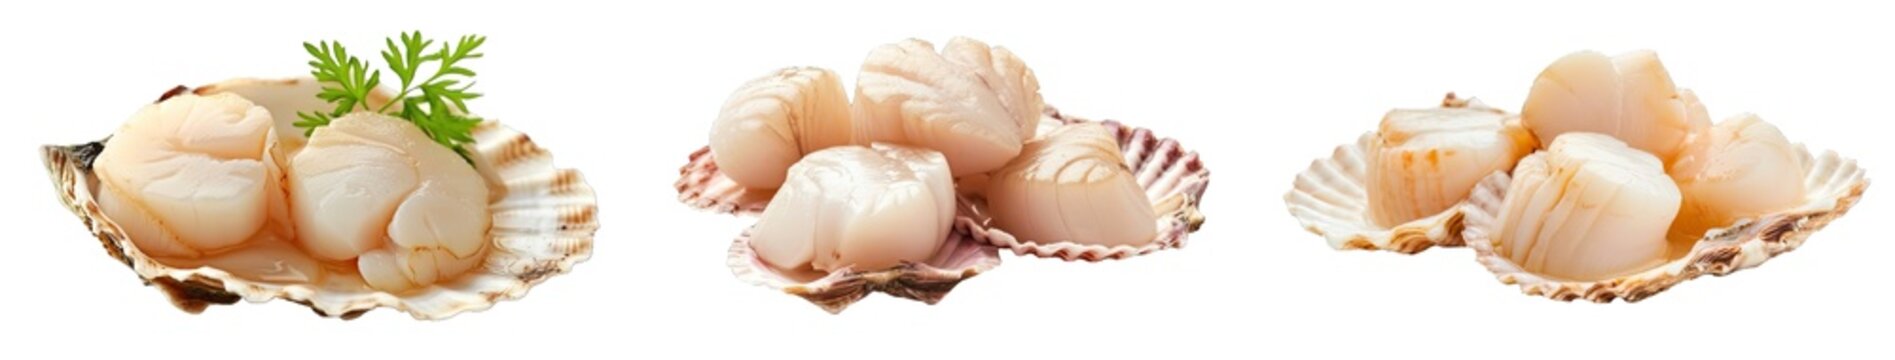 Collection of PNG. Raw scallop meat isolated on a transparent background.